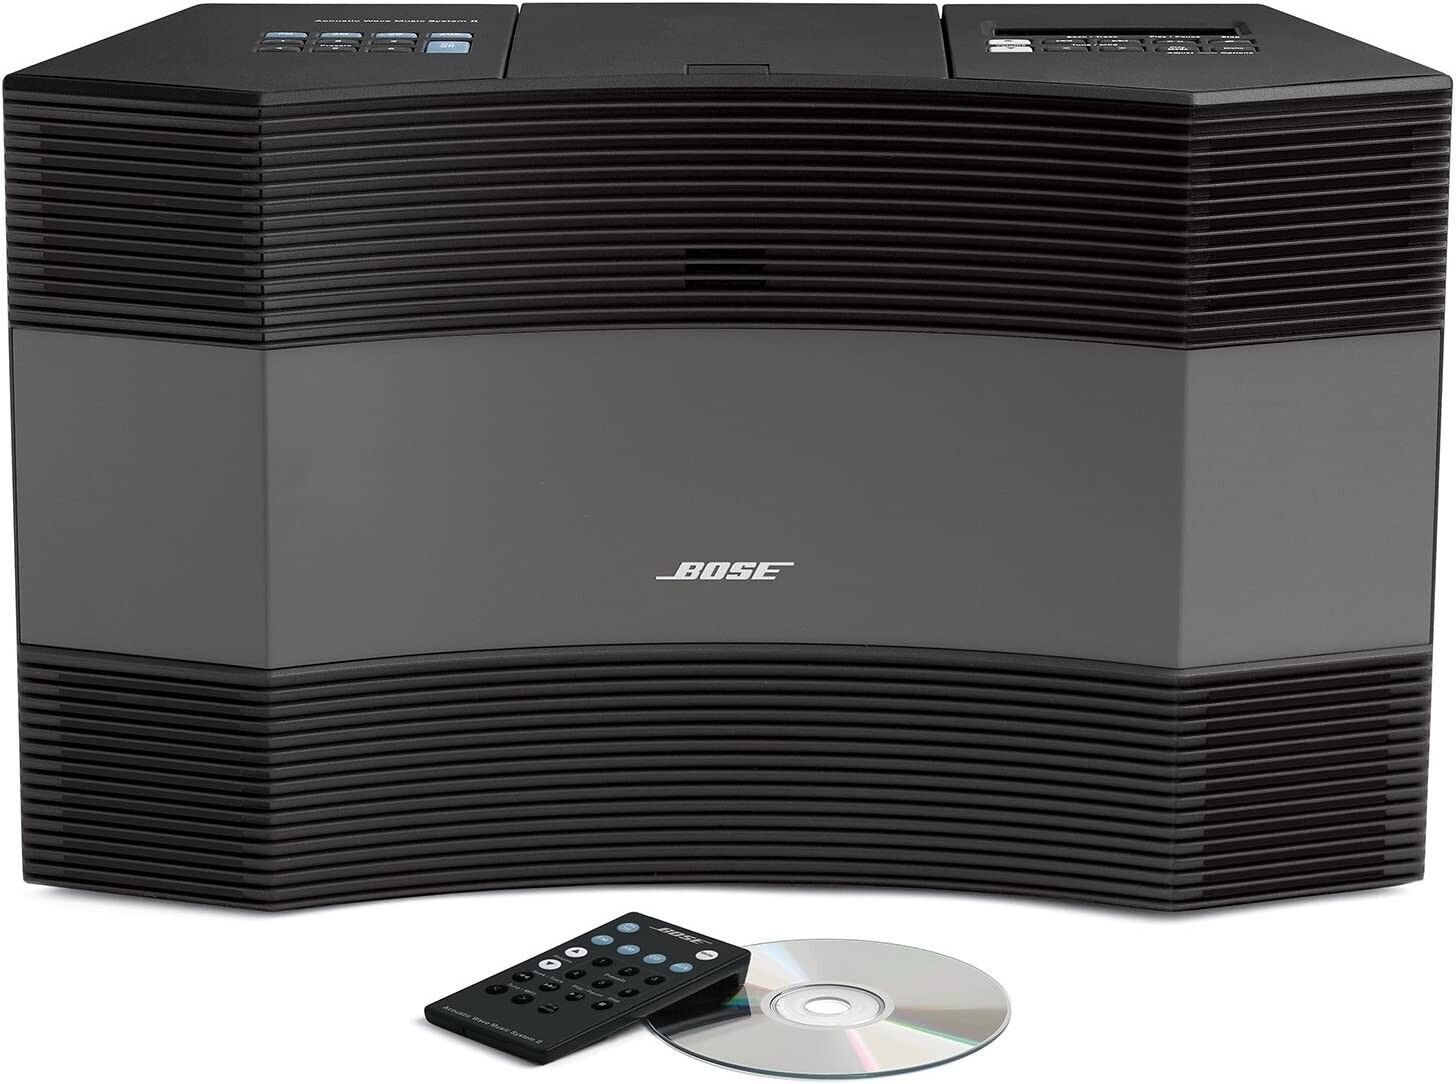 Primary image for Bose Acoustic Wave Music System ll AM/FM & CD Player W/Remote